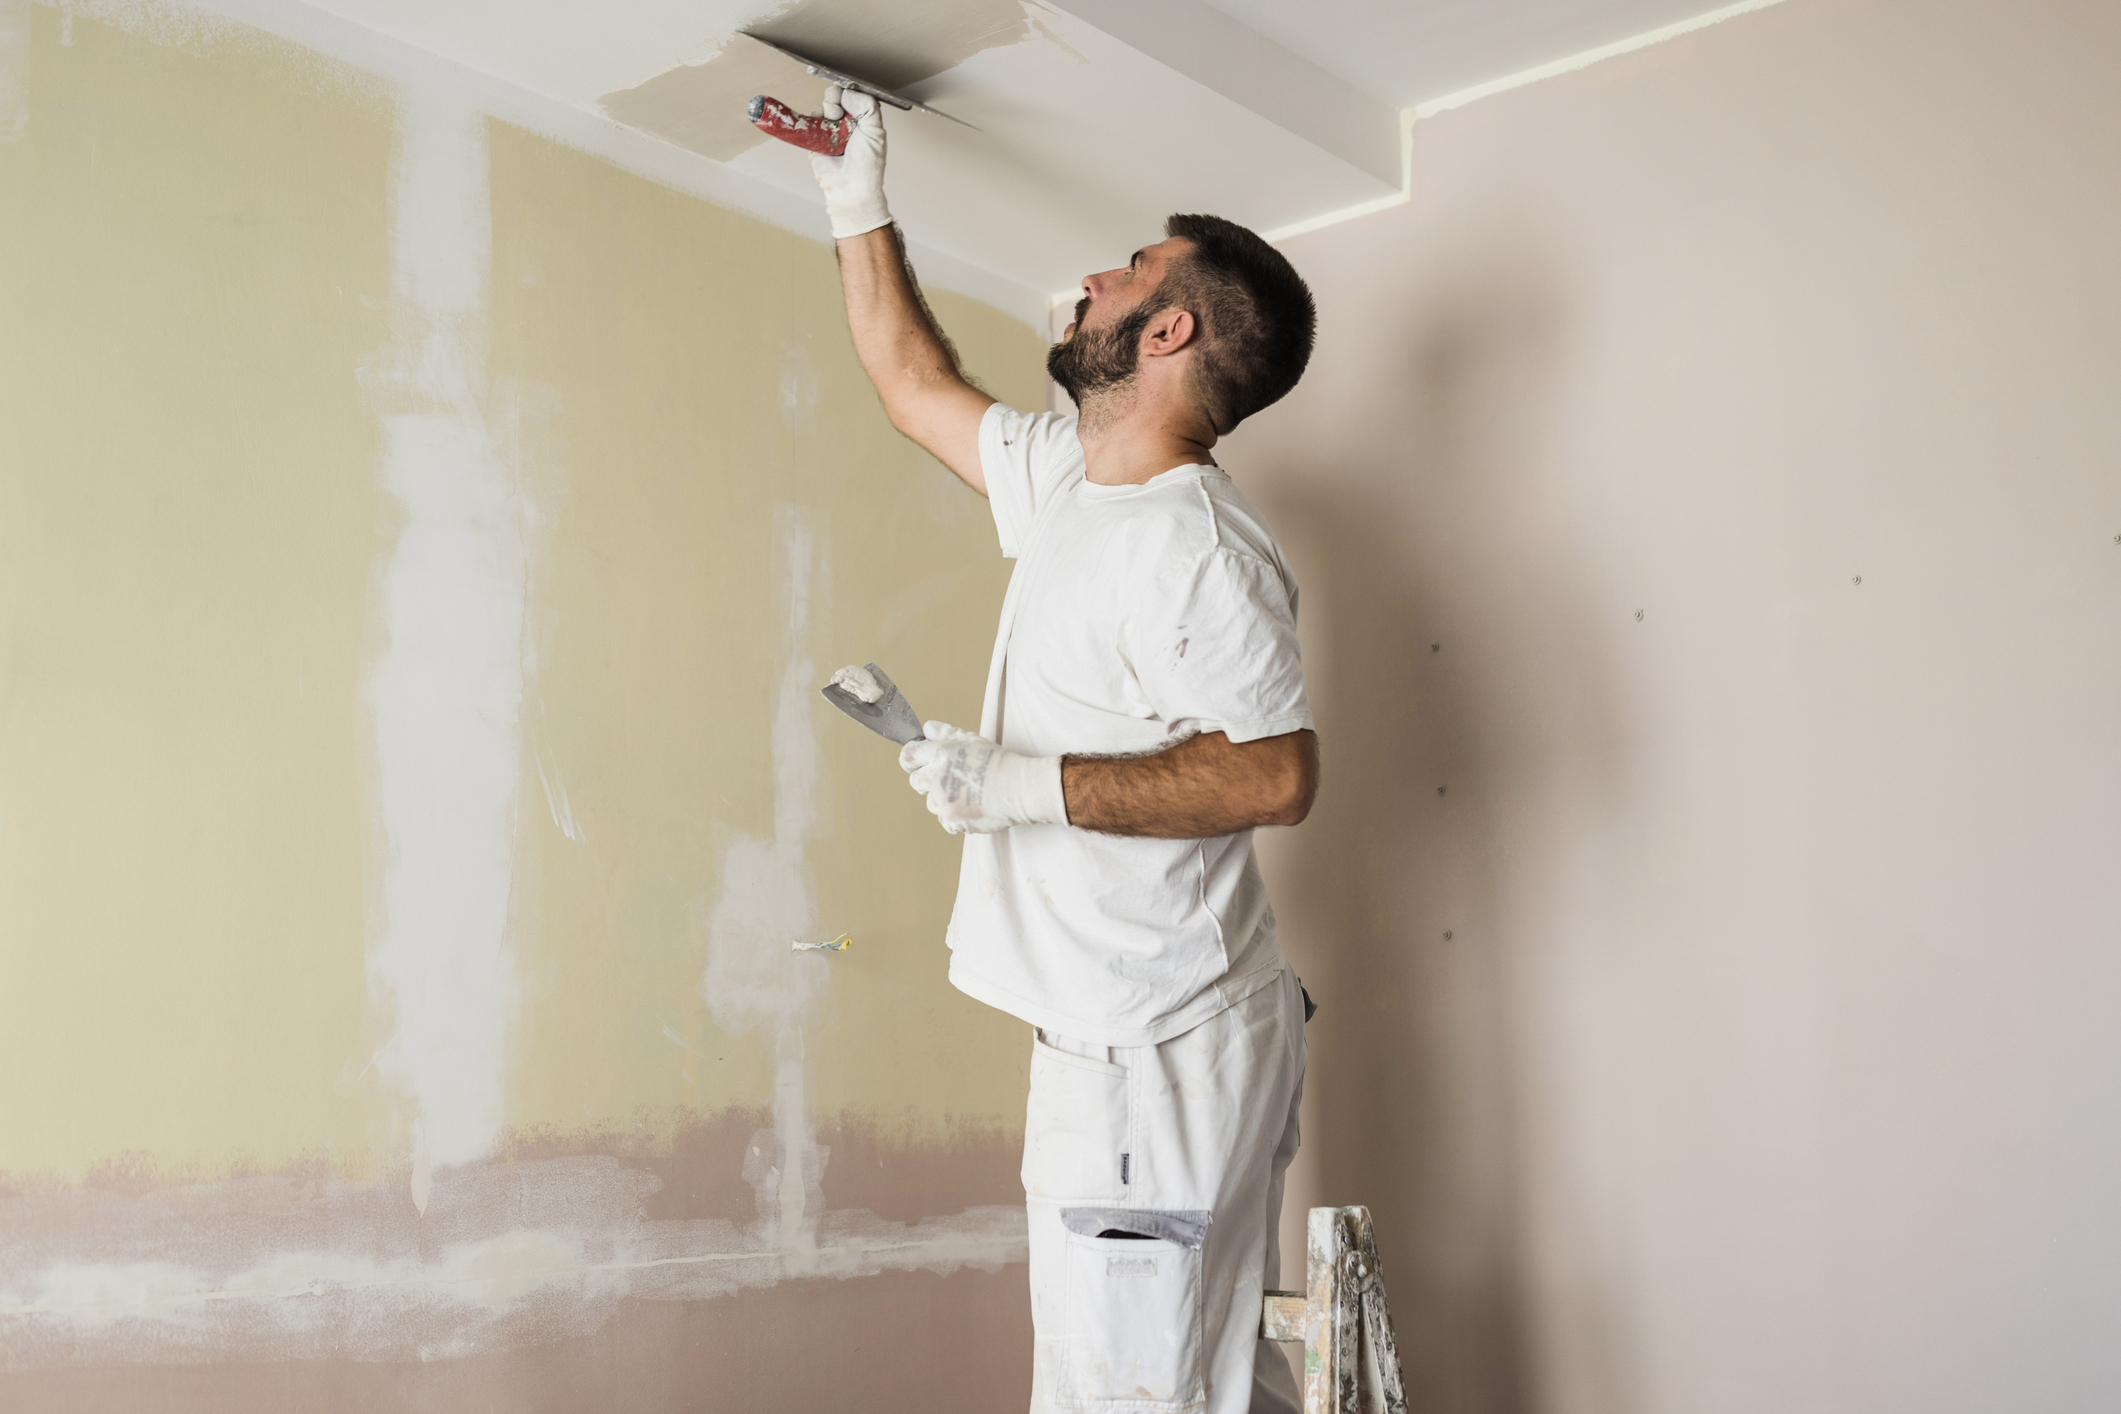 A man wearing white overalls paints a ceiling